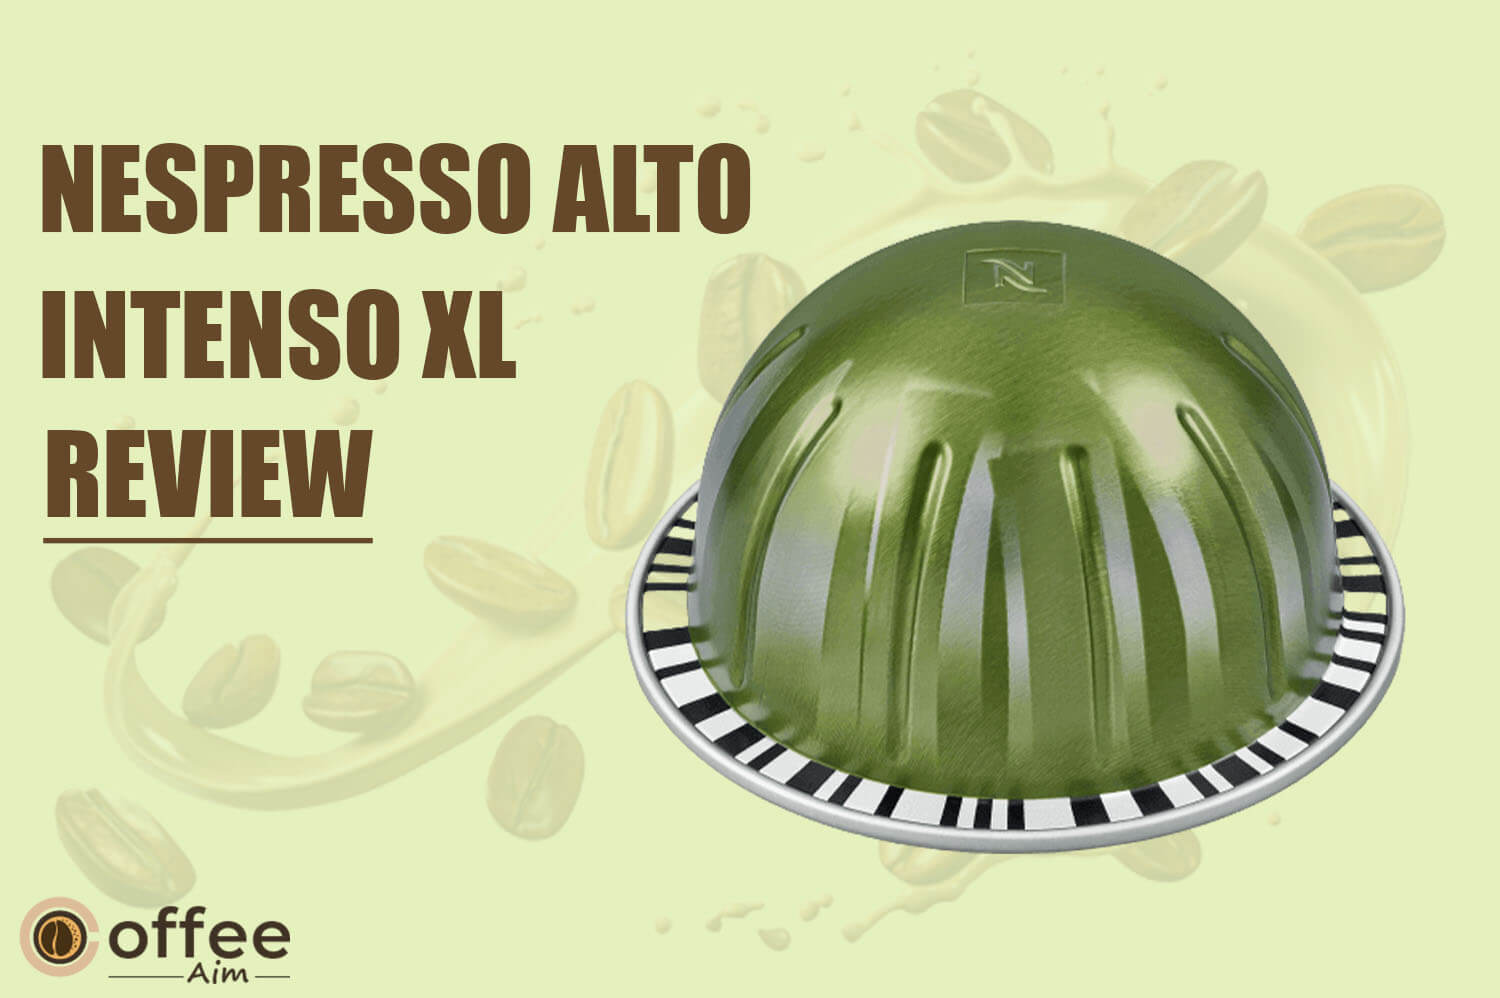 Featured image for the article "Nespresso Alto Intenso XL Review"